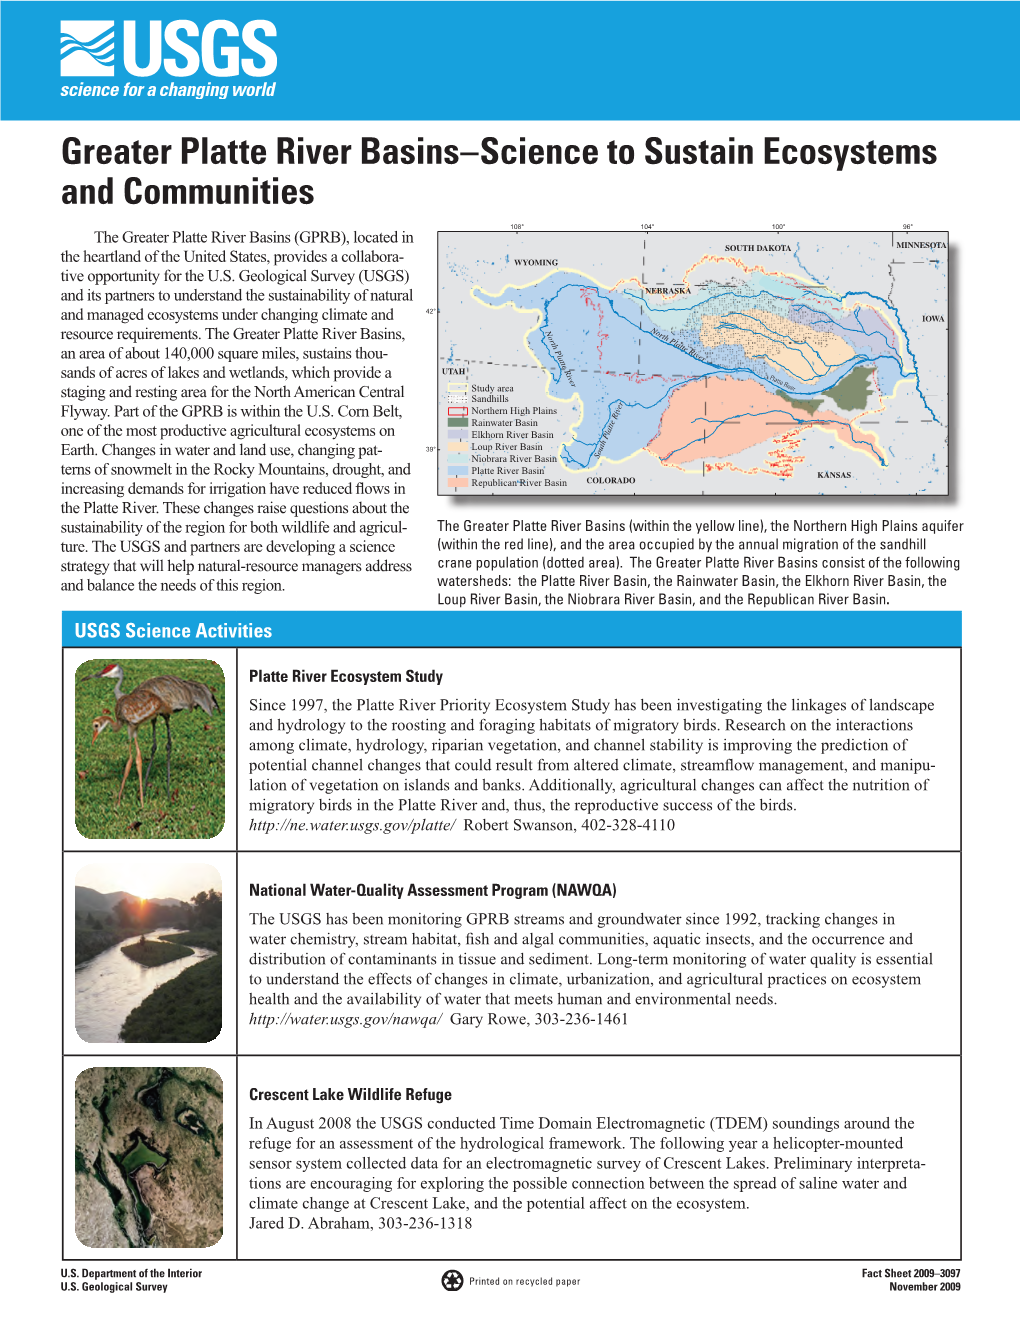 Greater Platte River Basins–Science to Sustain Ecosystems and Communities